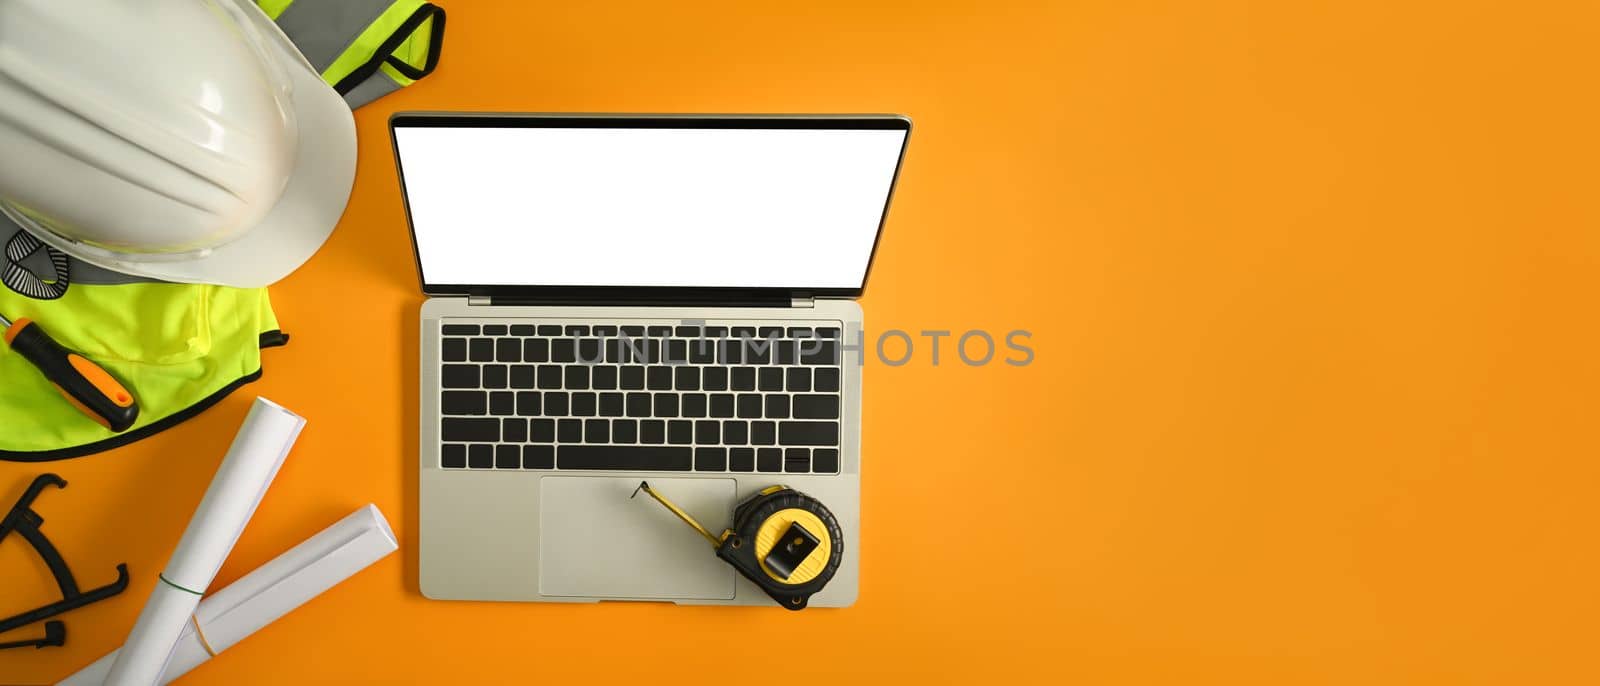 Laptop, yellow vest, safety helmets and blueprints on yellow background. Top view with copy space for your text.